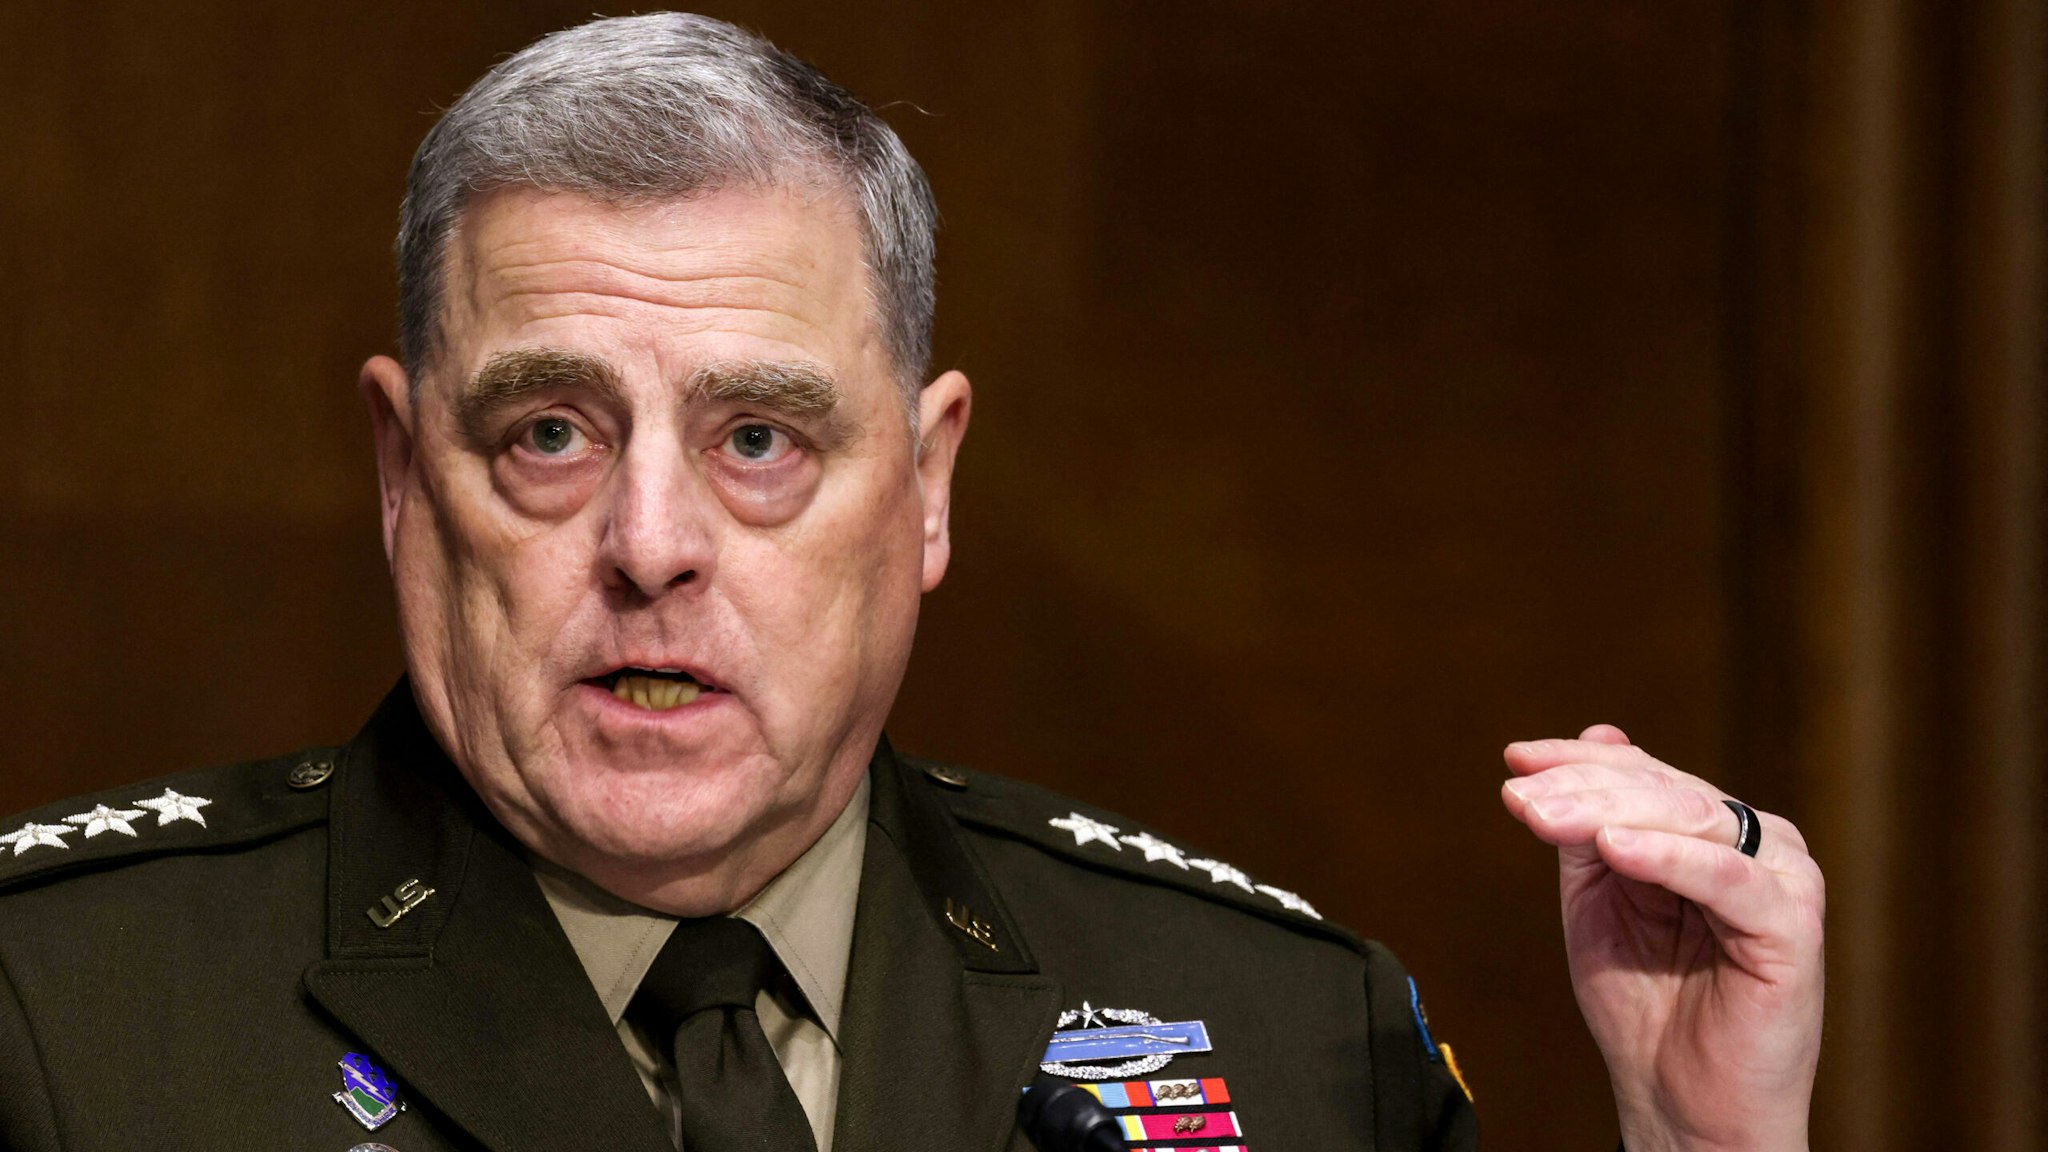 Chairman of the Joint Chiefs of Staff Gen. Mark Milley testifies before a Senate Committee on Appropriations hearing on the 2022 budget for the Defense Department, on Capitol Hill in Washington, DC, June 17, 2021.